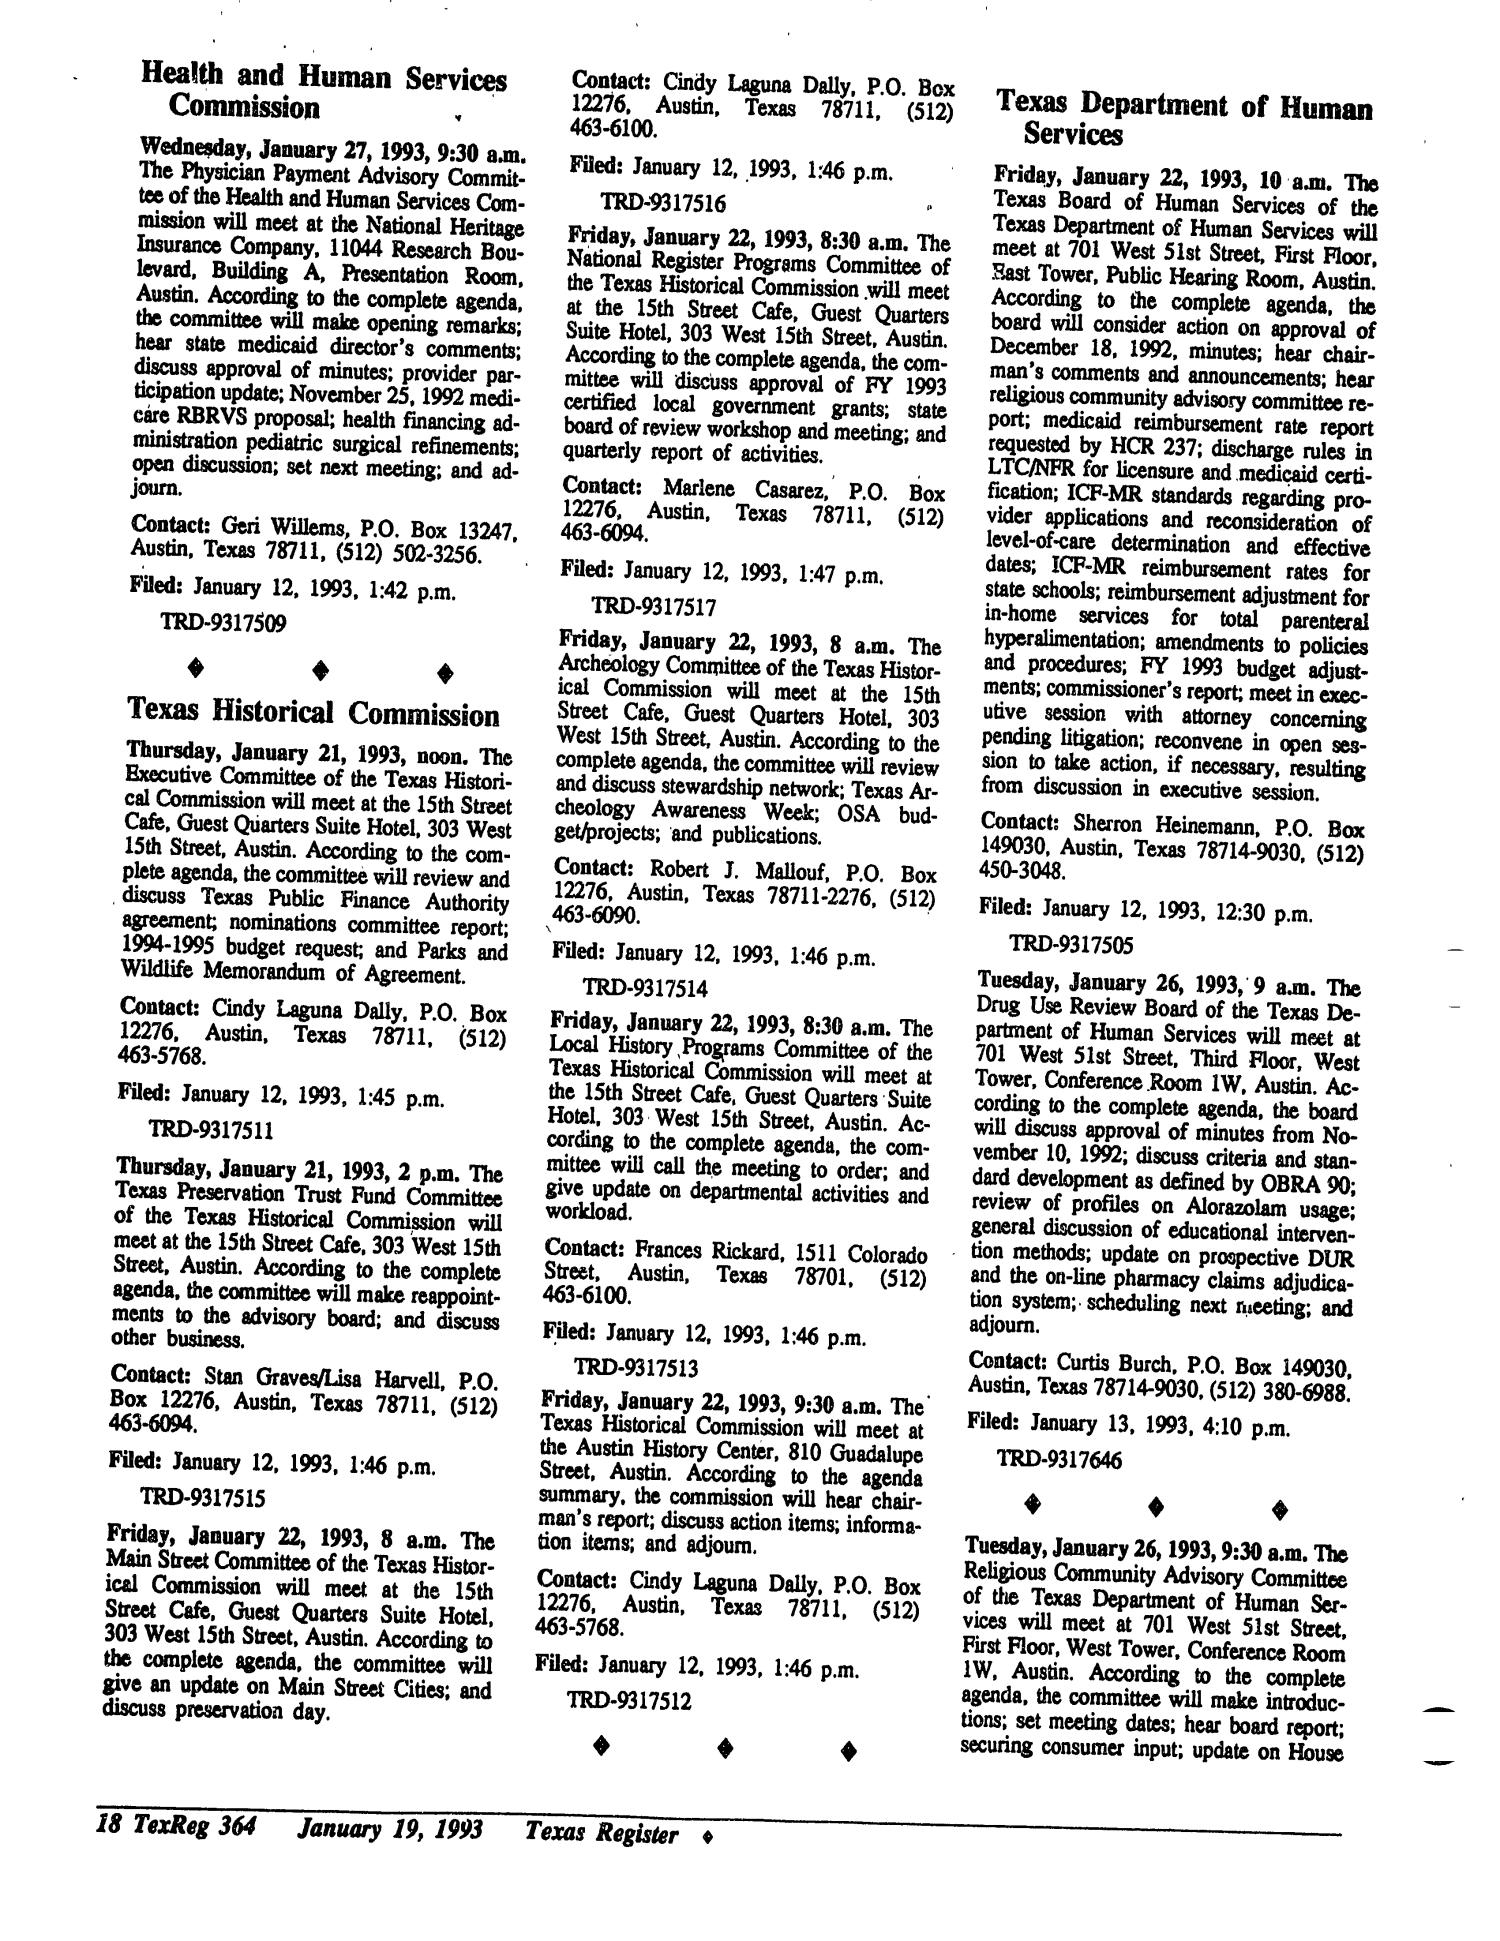 Texas Register, Volume 18, Number 6, Pages 339-381, January 19, 1993
                                                
                                                    364
                                                